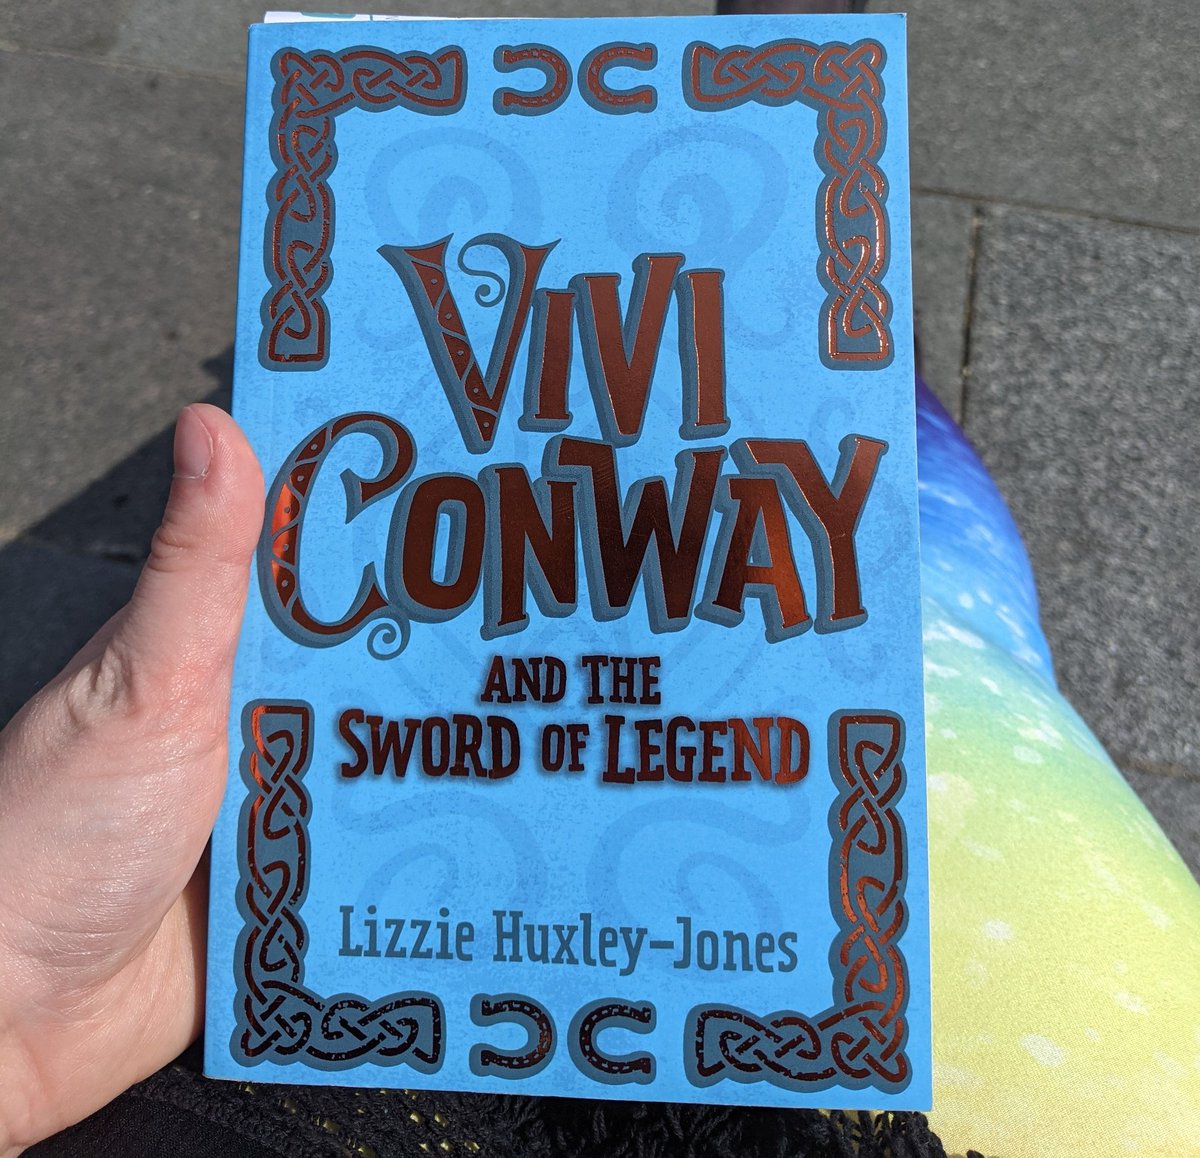 There's some amazing Children's books published today, and one of my favourites is Vivi Conway and the Sword of Legend!

Congratulations @littlehux 🎉🎉

Cannot wait to get my hands on a finished copy!

My full review will be on waterstones.com very soon 😁

#ViviConway